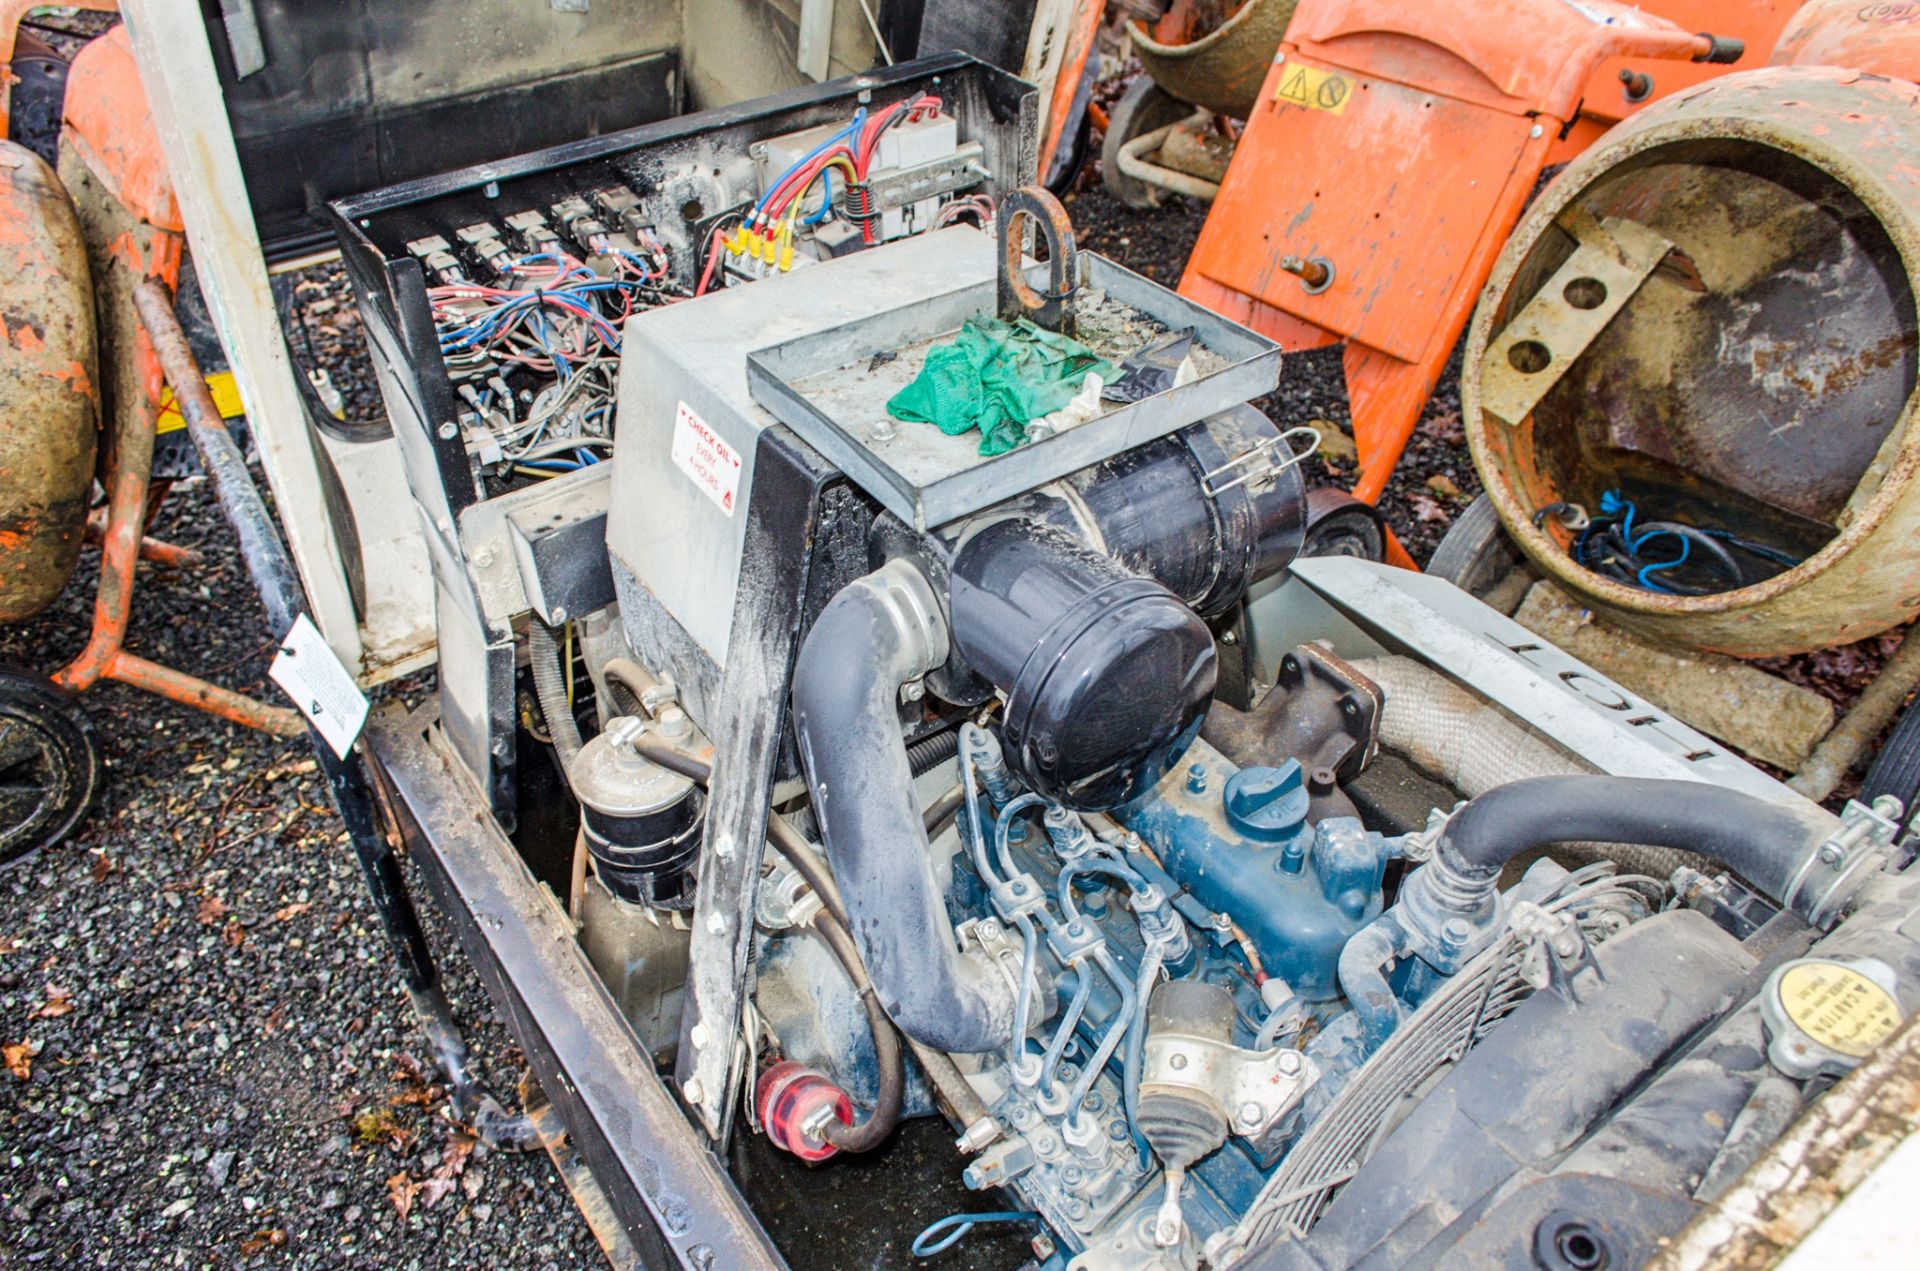 MHM MG10000 10 kva diesel driven generator A788168 - Image 4 of 4